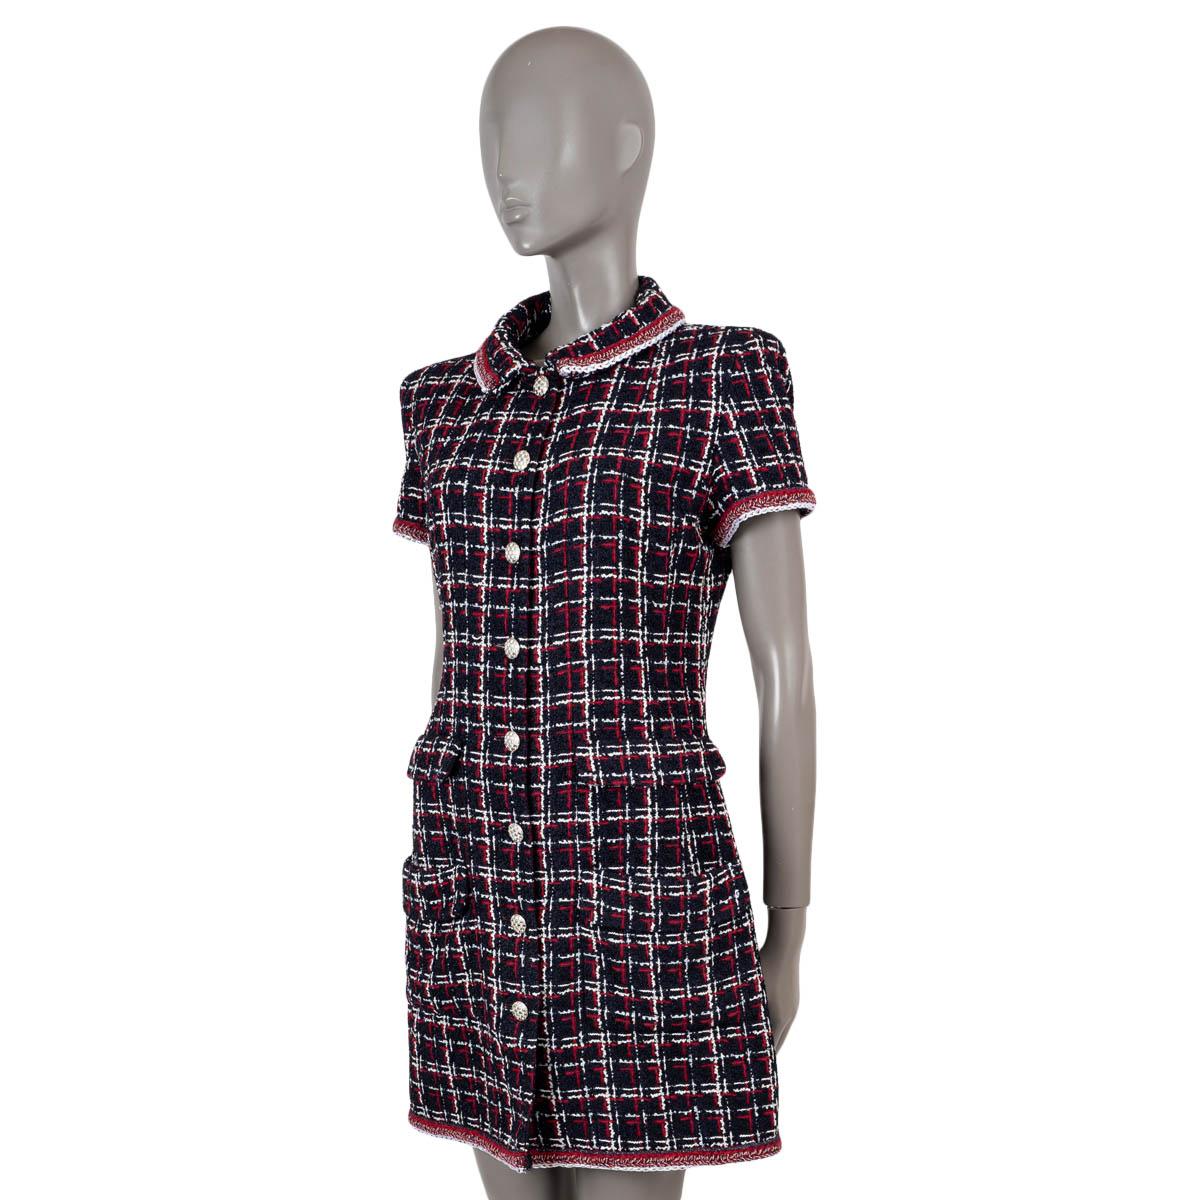 100% authentic Chanel short sleeve tweed shirt dress in navy blue, red and white viscose (50%), linen (22%), polyamide (17%) and cotton (11%). Features braided trims and four flap pockets at the waist. Opens with rhinestone encrusted buttons on the